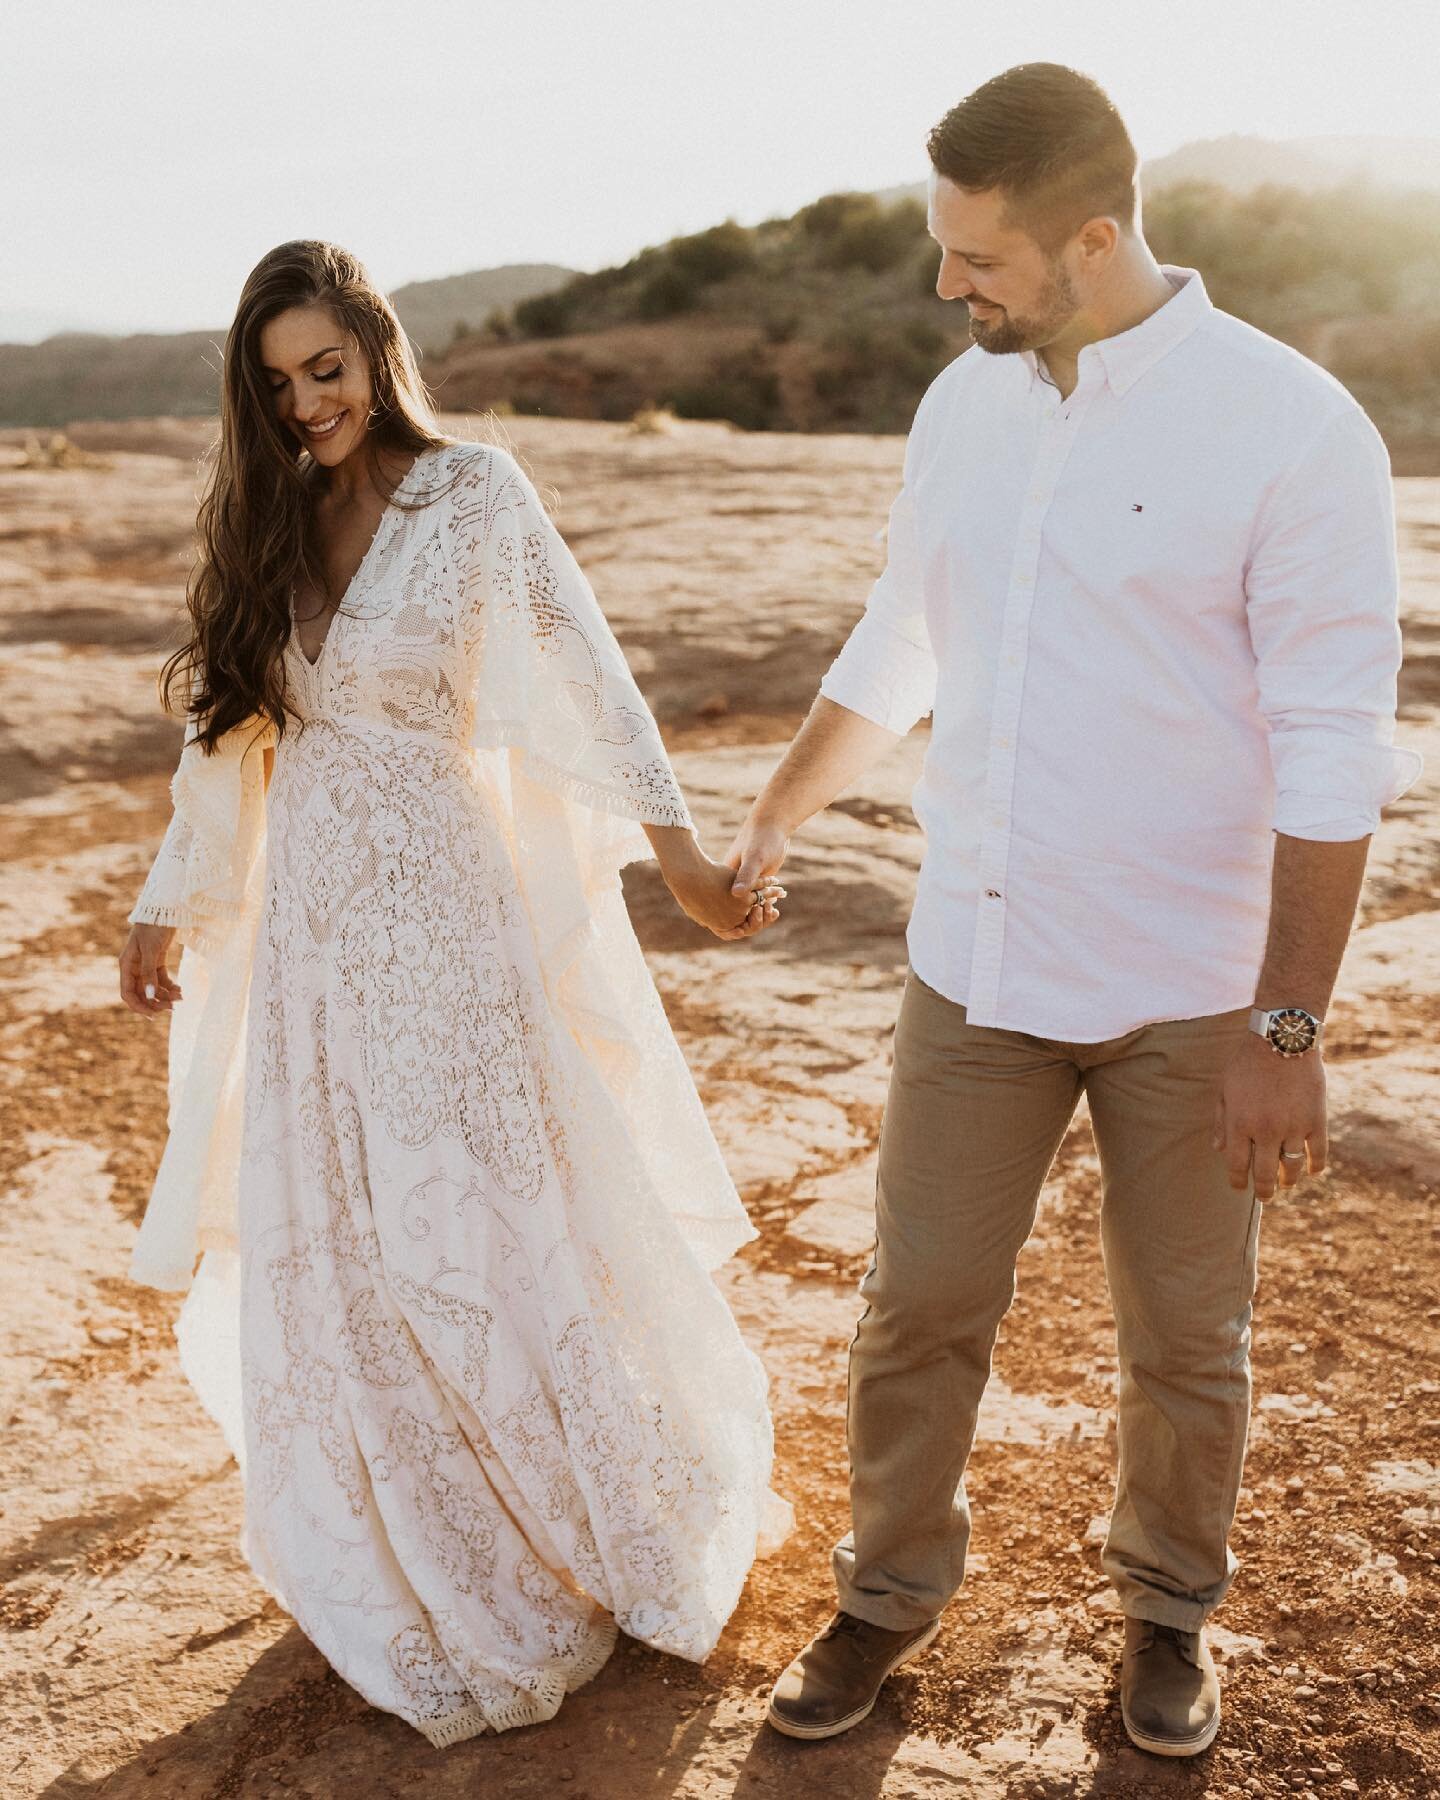 if you&rsquo;re torn between two wedding dresses OR worried your dress isn&rsquo;t good for hiking/adventuring in- CHANGE IT UP HALFWAY THROUGH THE DAY⁣
⁣
Crystal &amp; Jay loved the look of their beautiful wedding attire but knew it might not be the